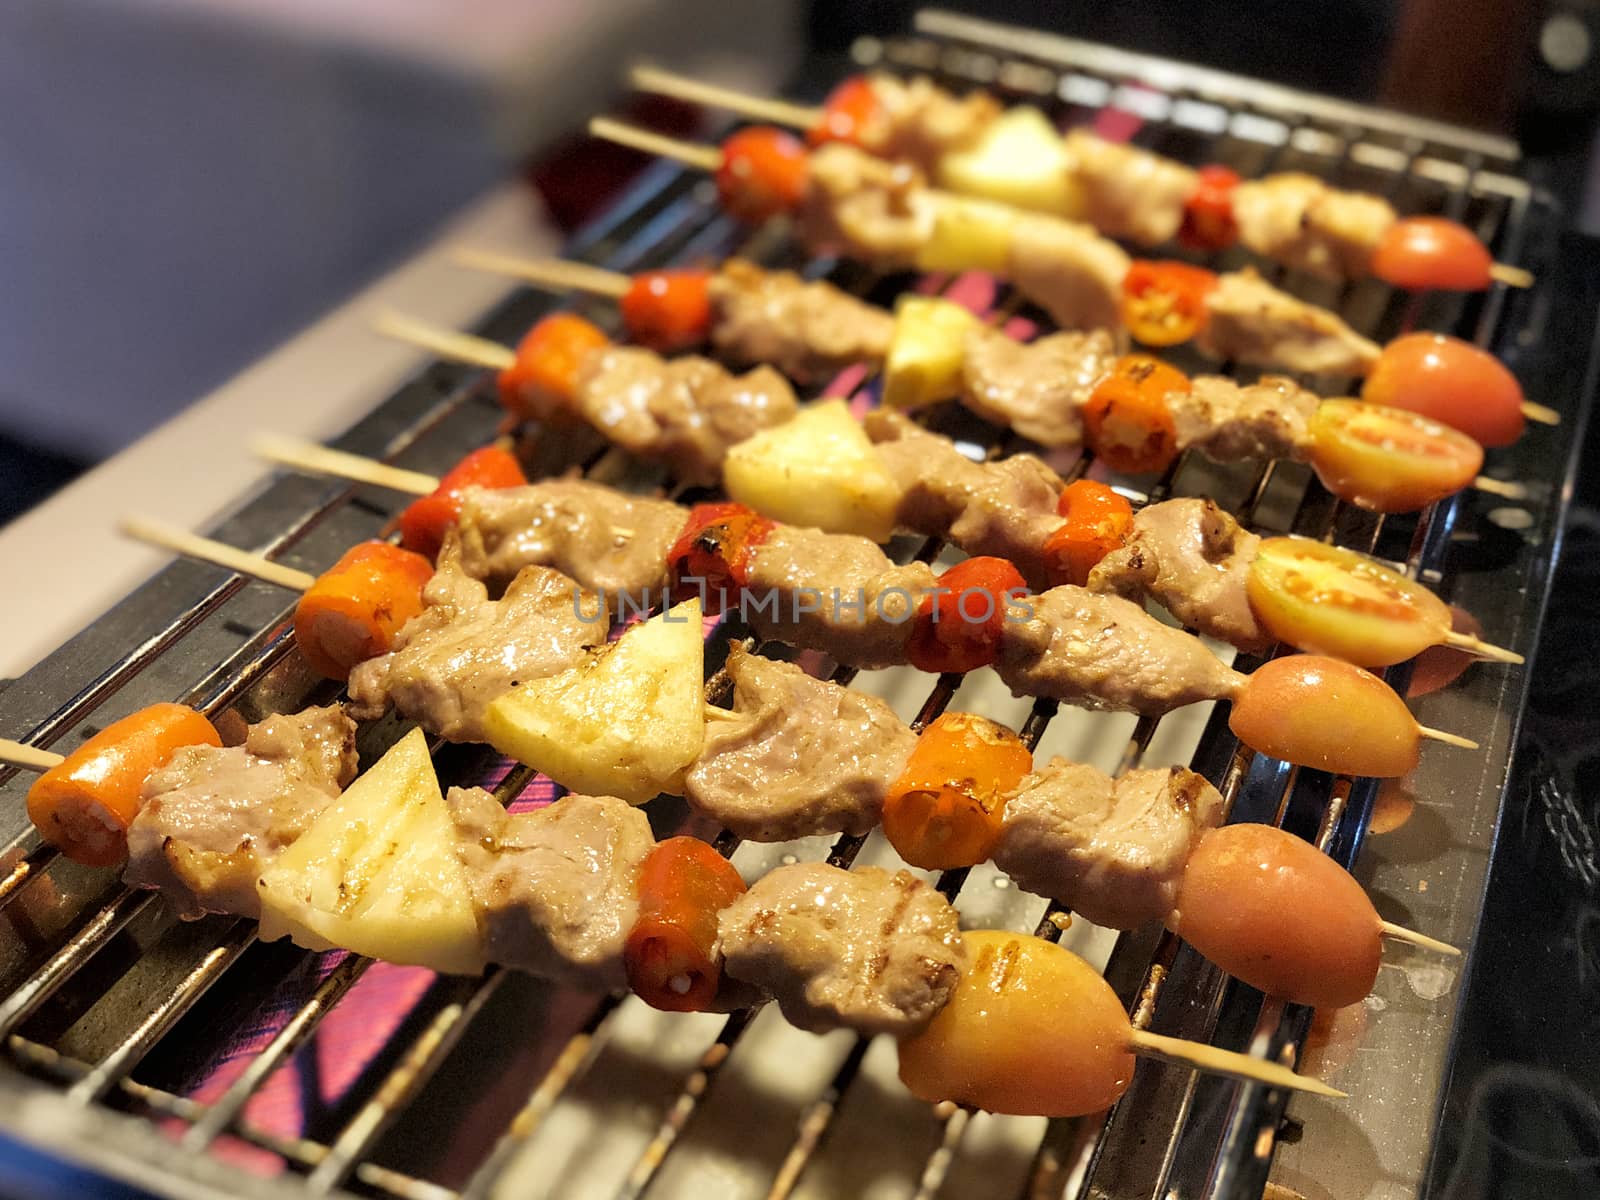 Chicken and pork and various vegetables on barbecue grill cooked by Surasak